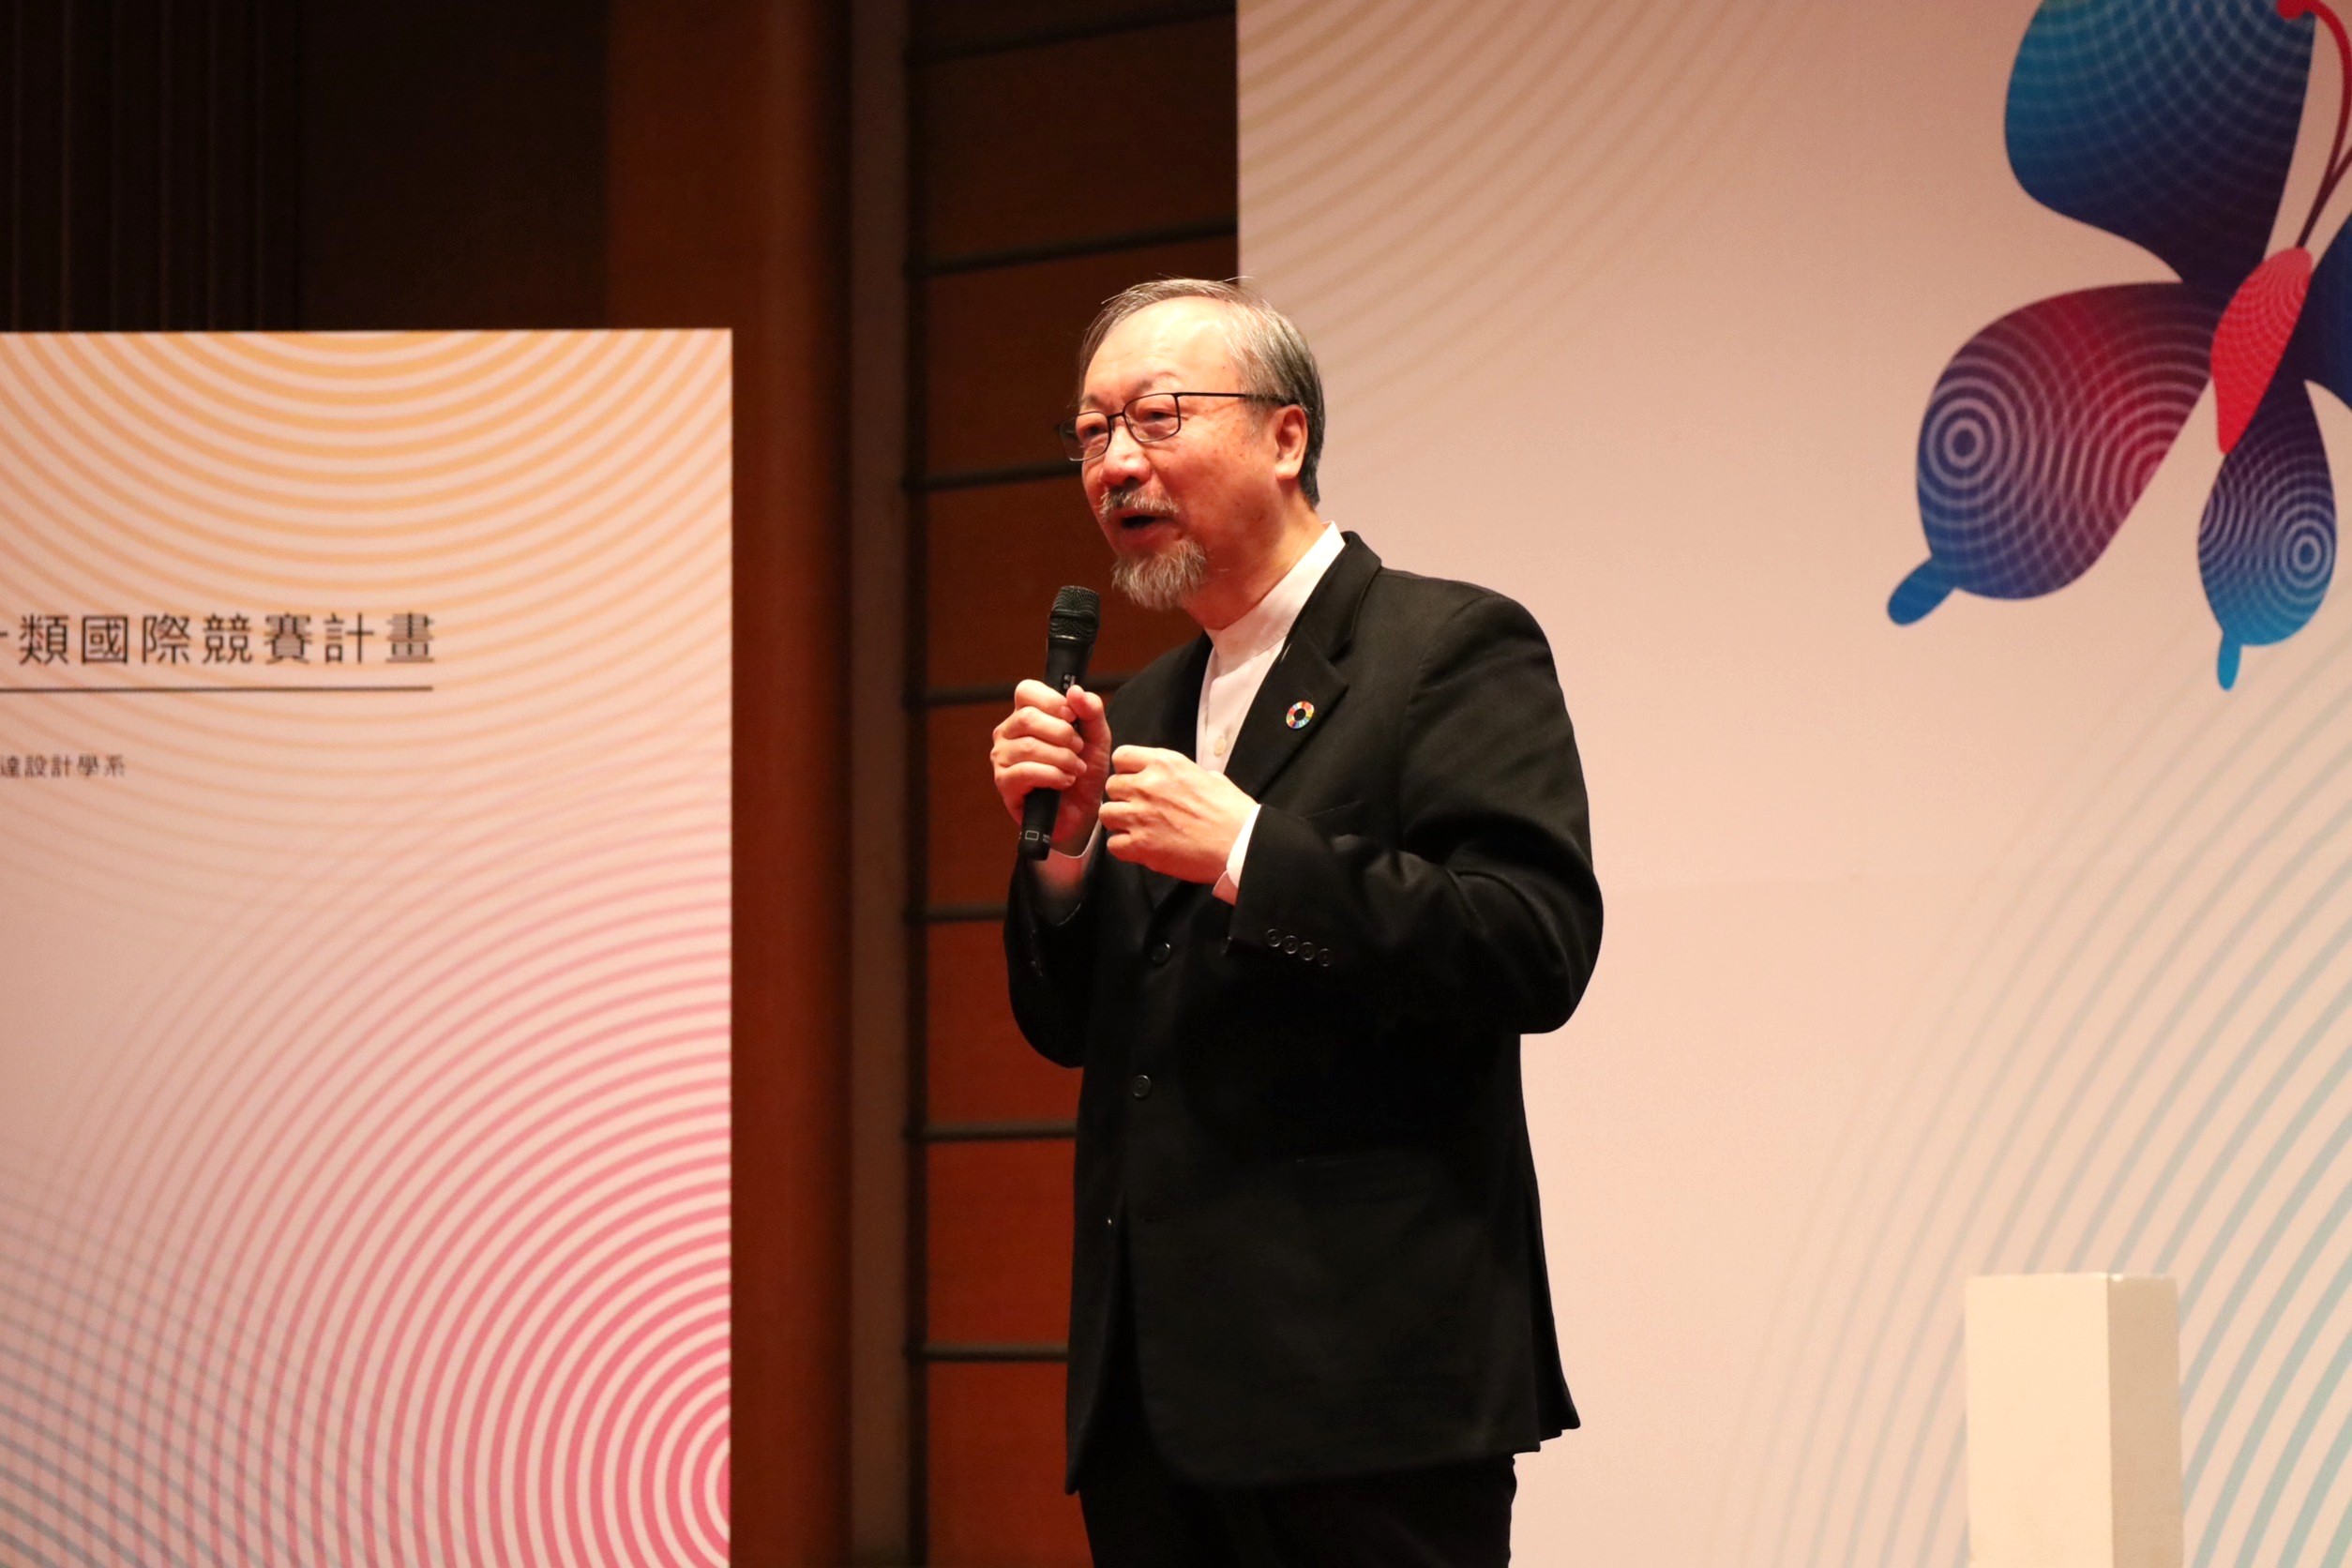 Professor Pang-Soong Lin, initiator of the ' Award Incentive Program ,' pointed out that the initiative has reached its 19th year, marking a phase focused on legacy and knowledge transmission